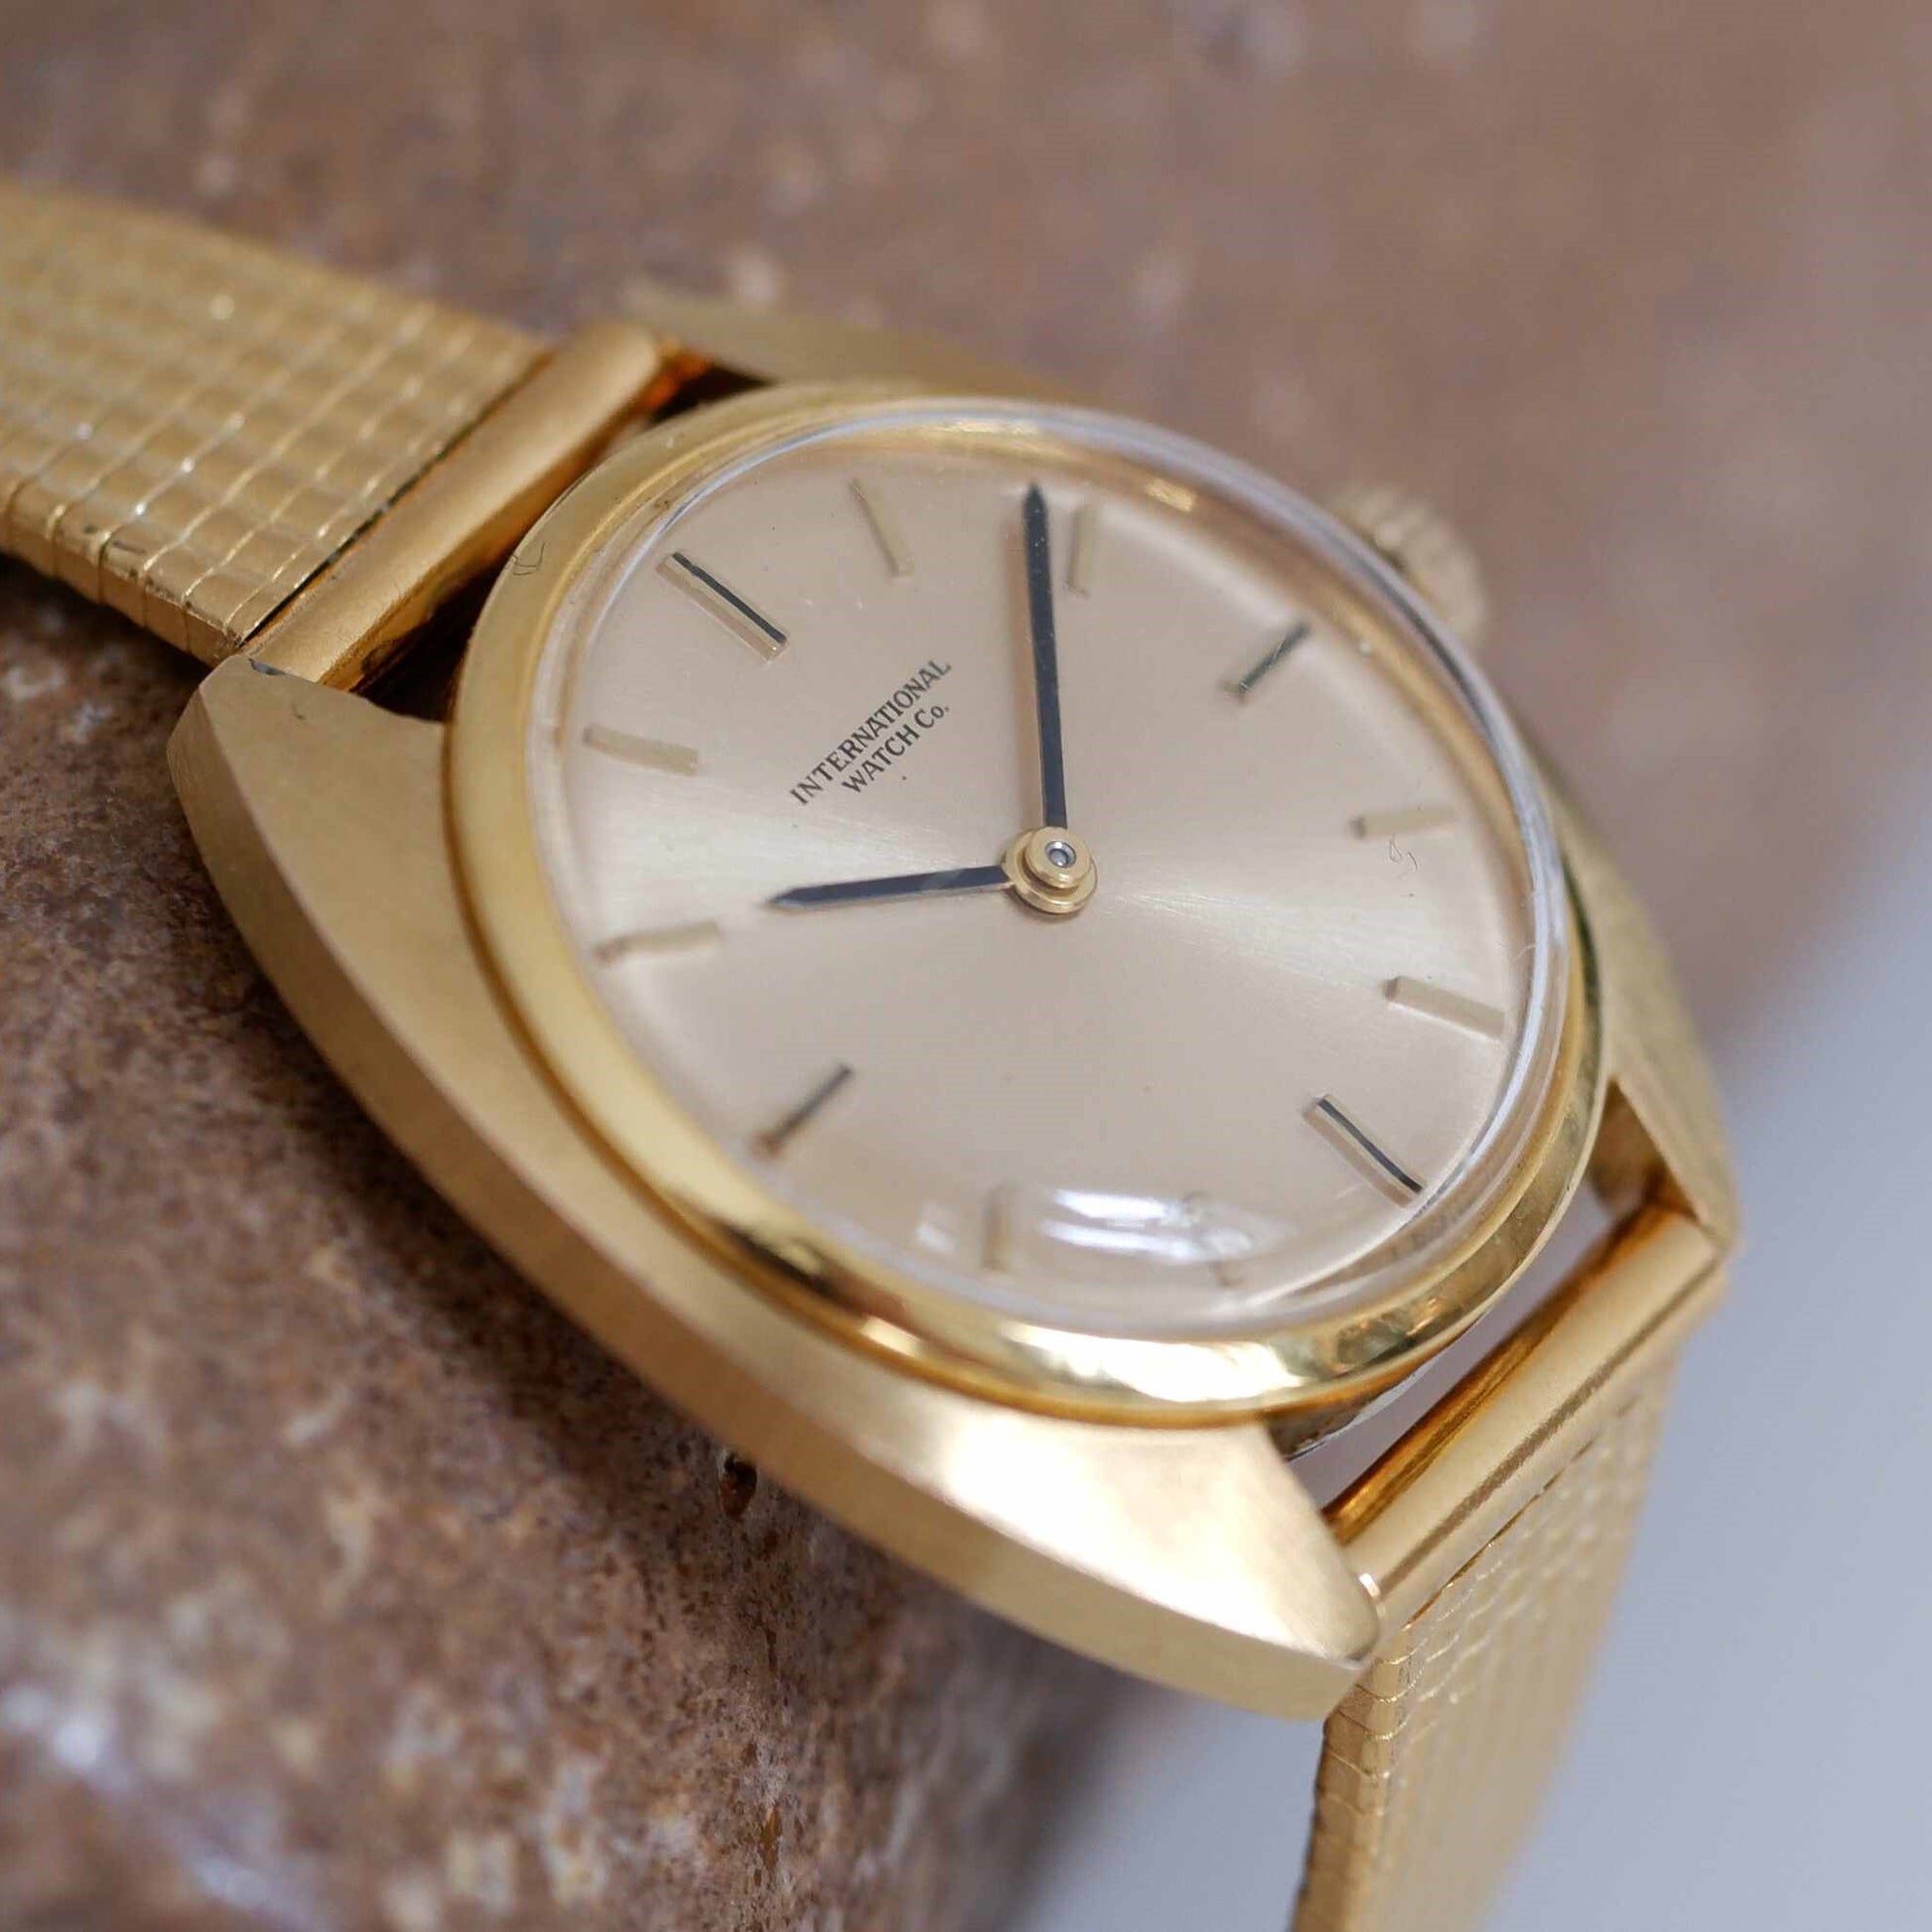 IWC Vintage Ladies Watch: 60s Golden Iconic, Gold Dial Mechanical | Slight LEft Side